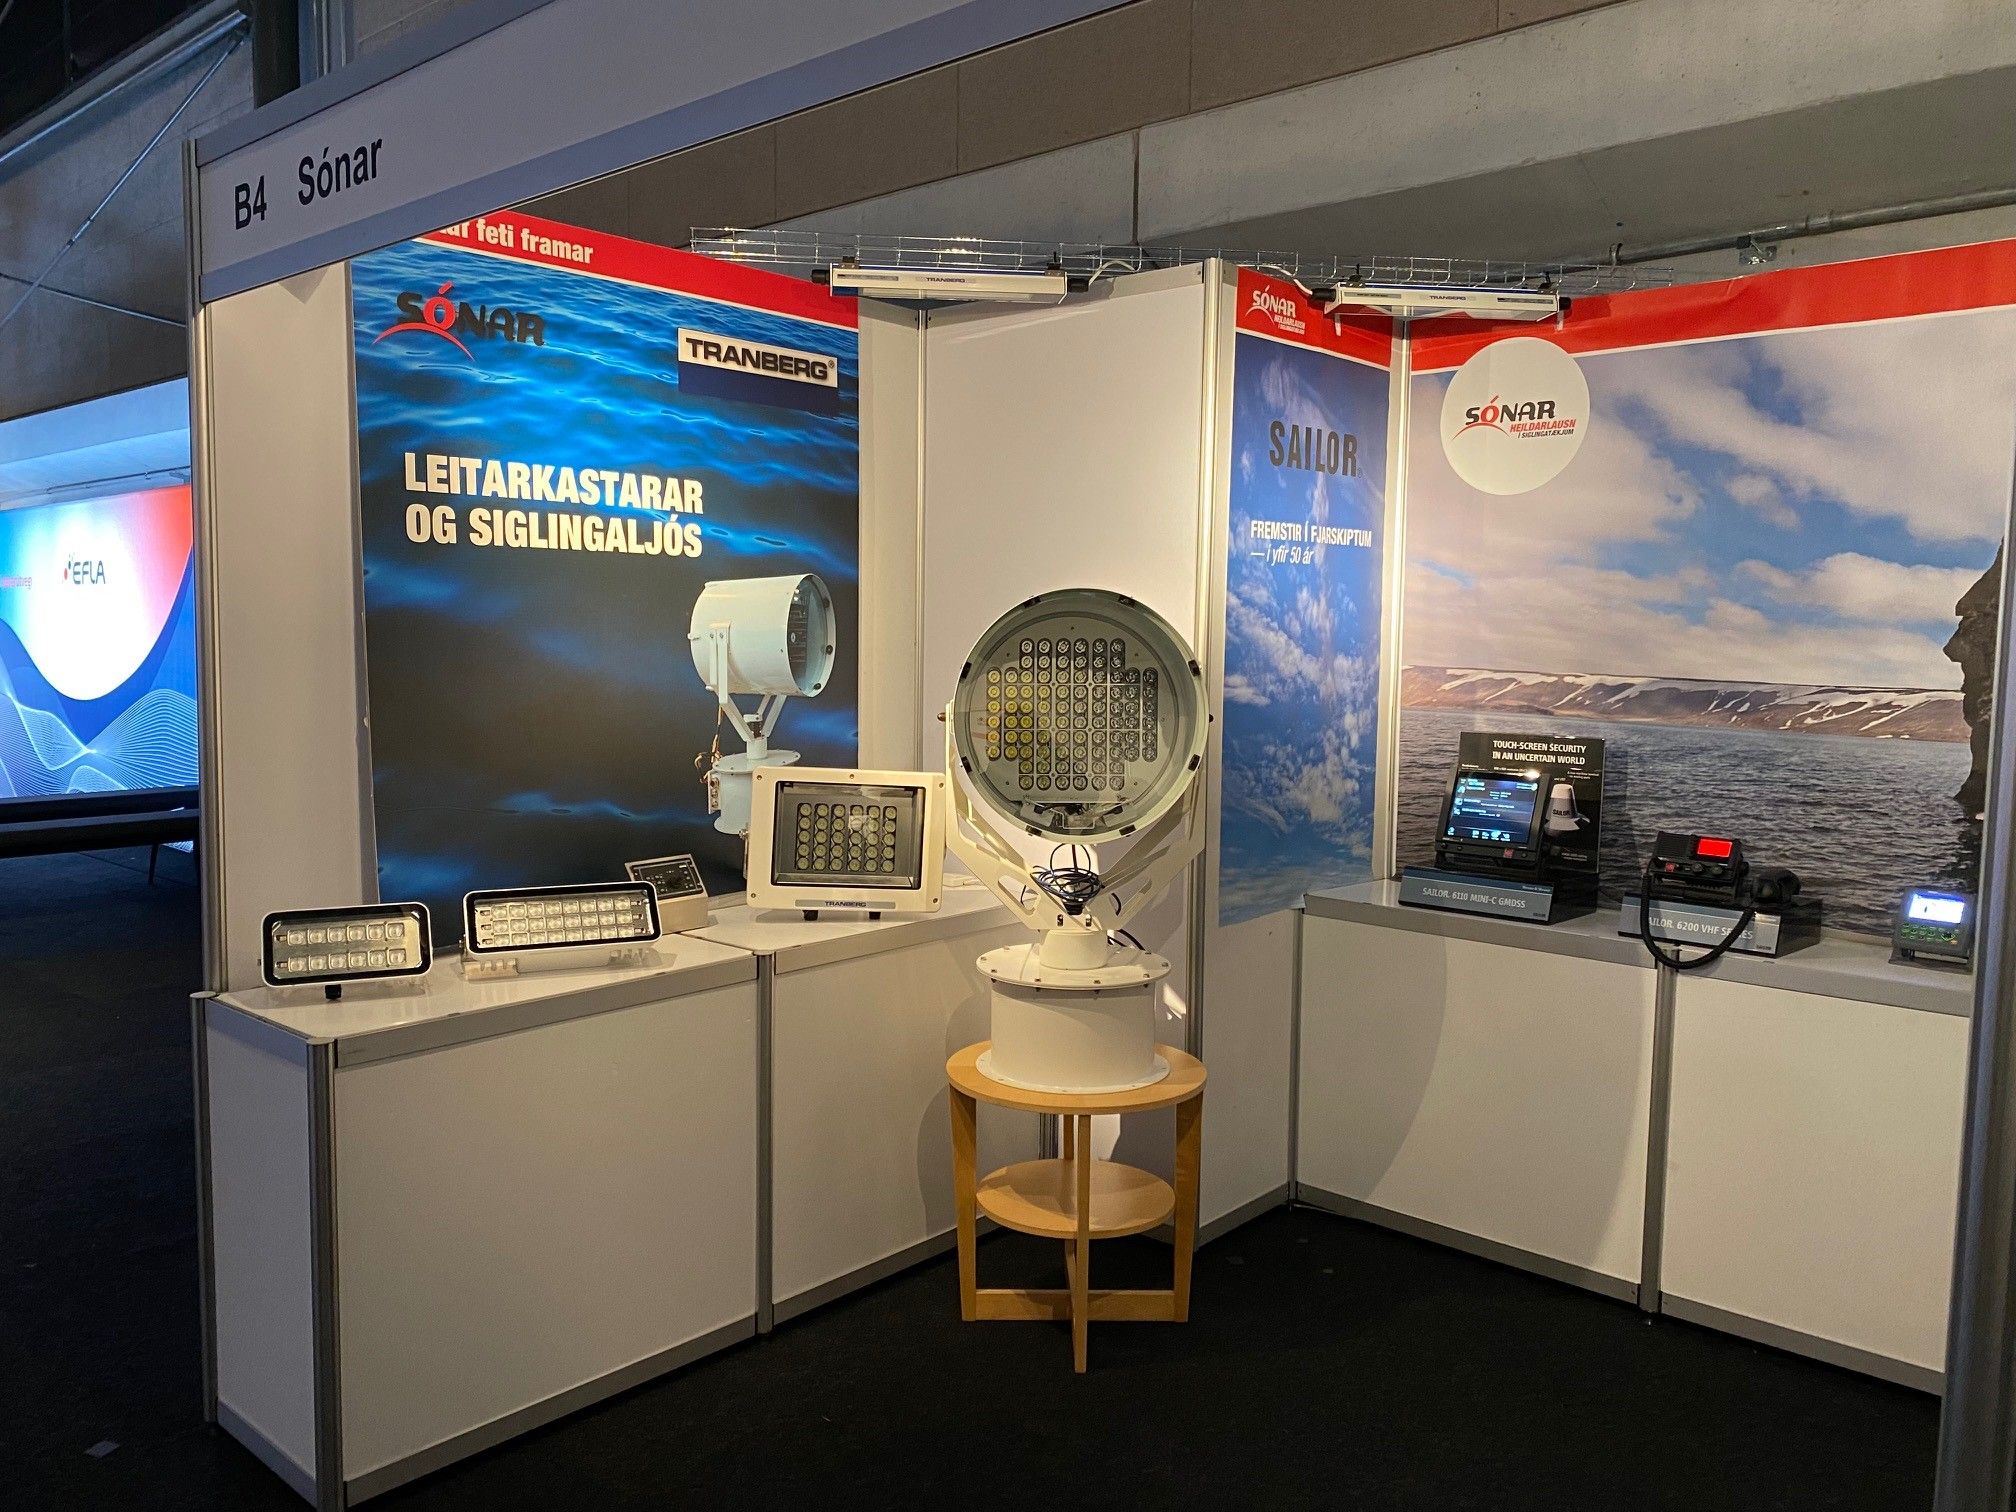 Overview of the stand R. STAHL TRANBERG had at Iceland Fishing Expo 2022